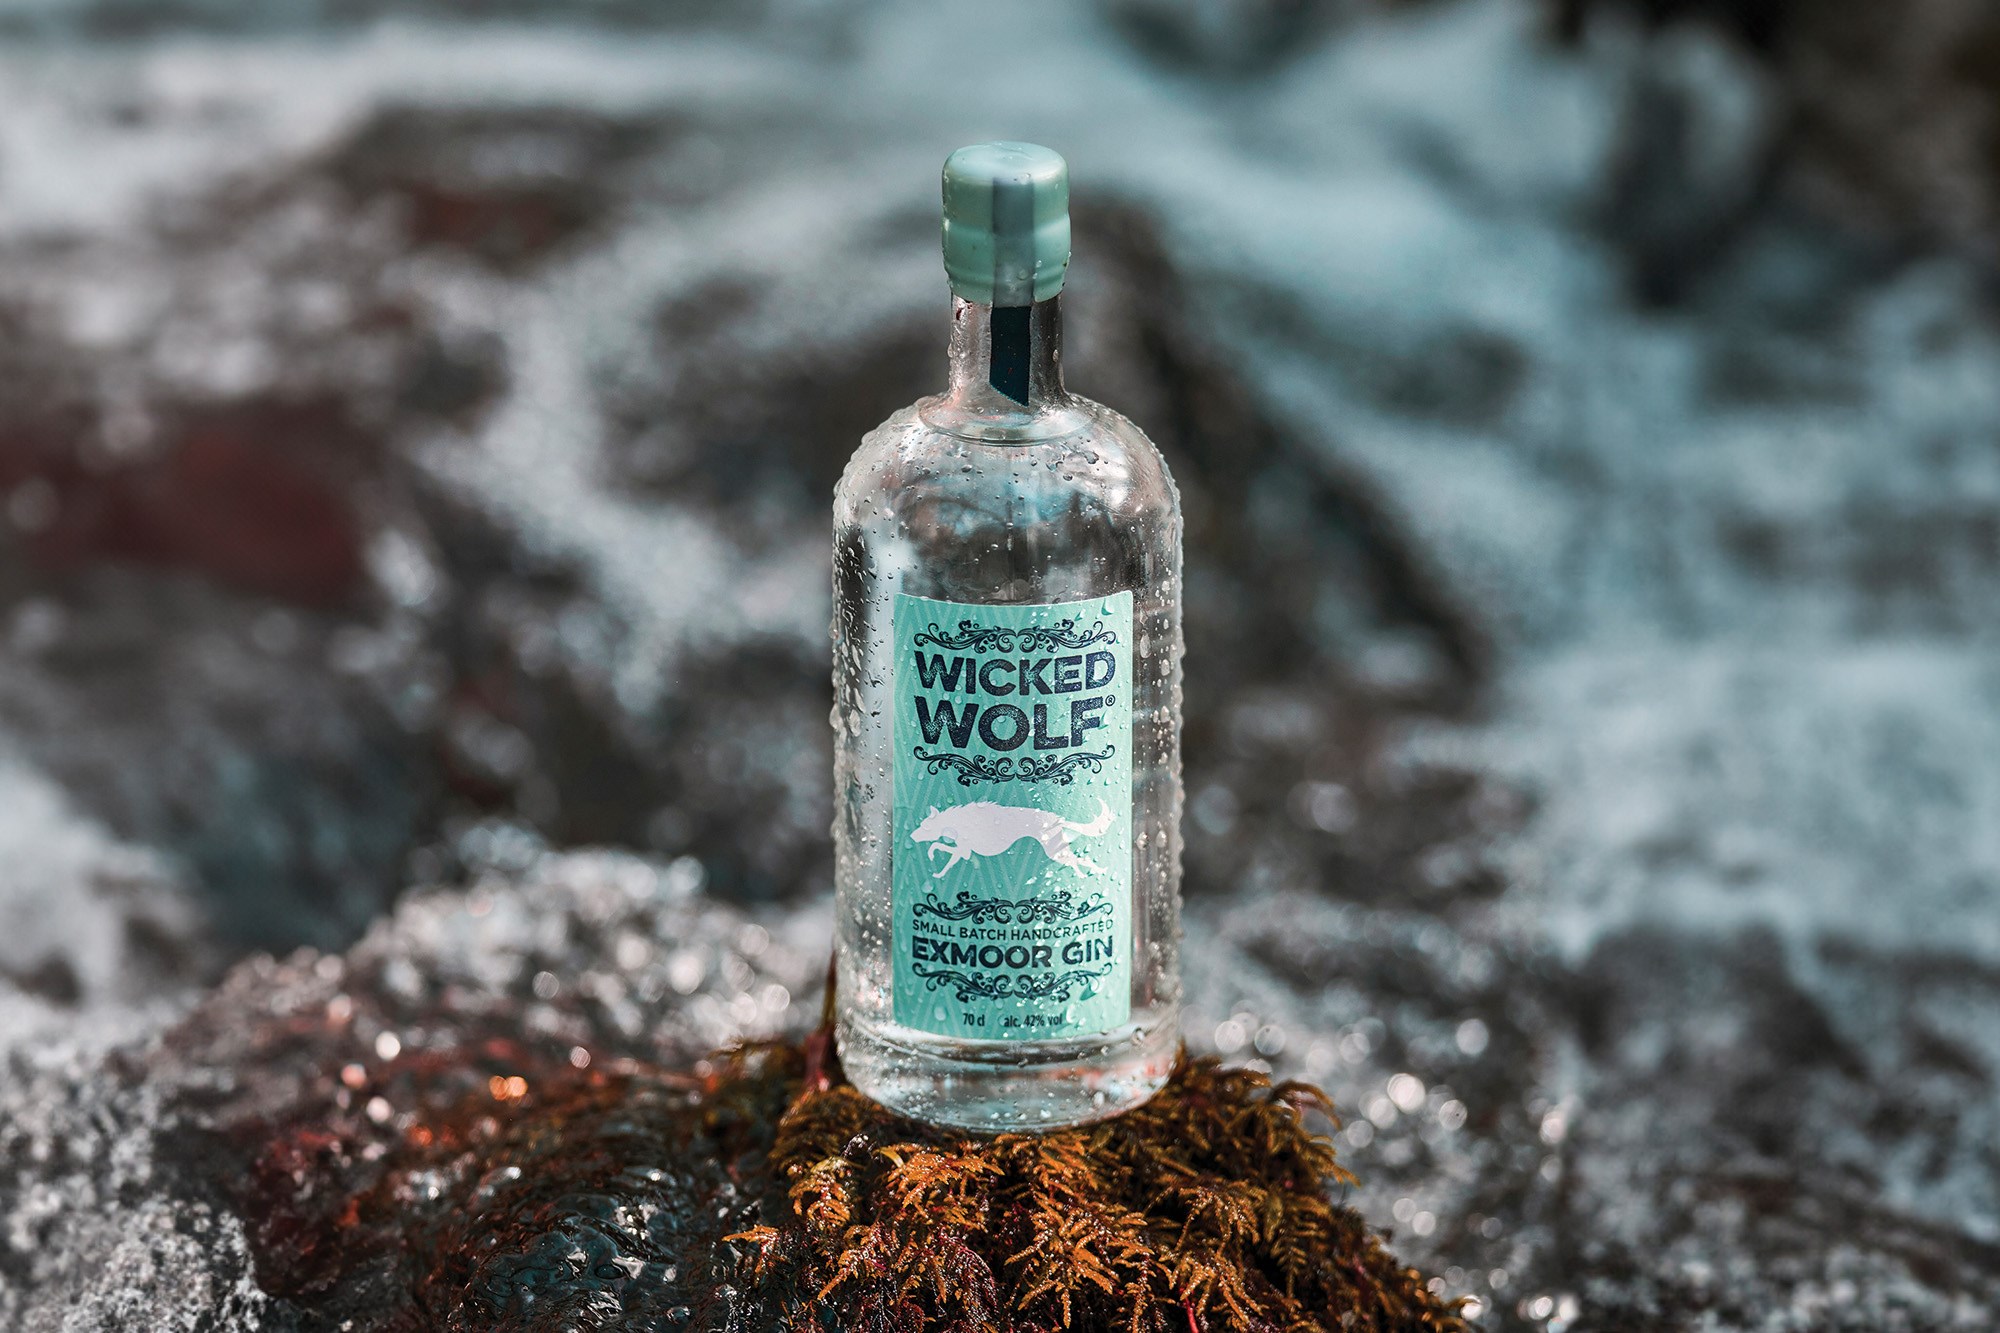 Wicked Wolf Exmoor Gin - 70cl